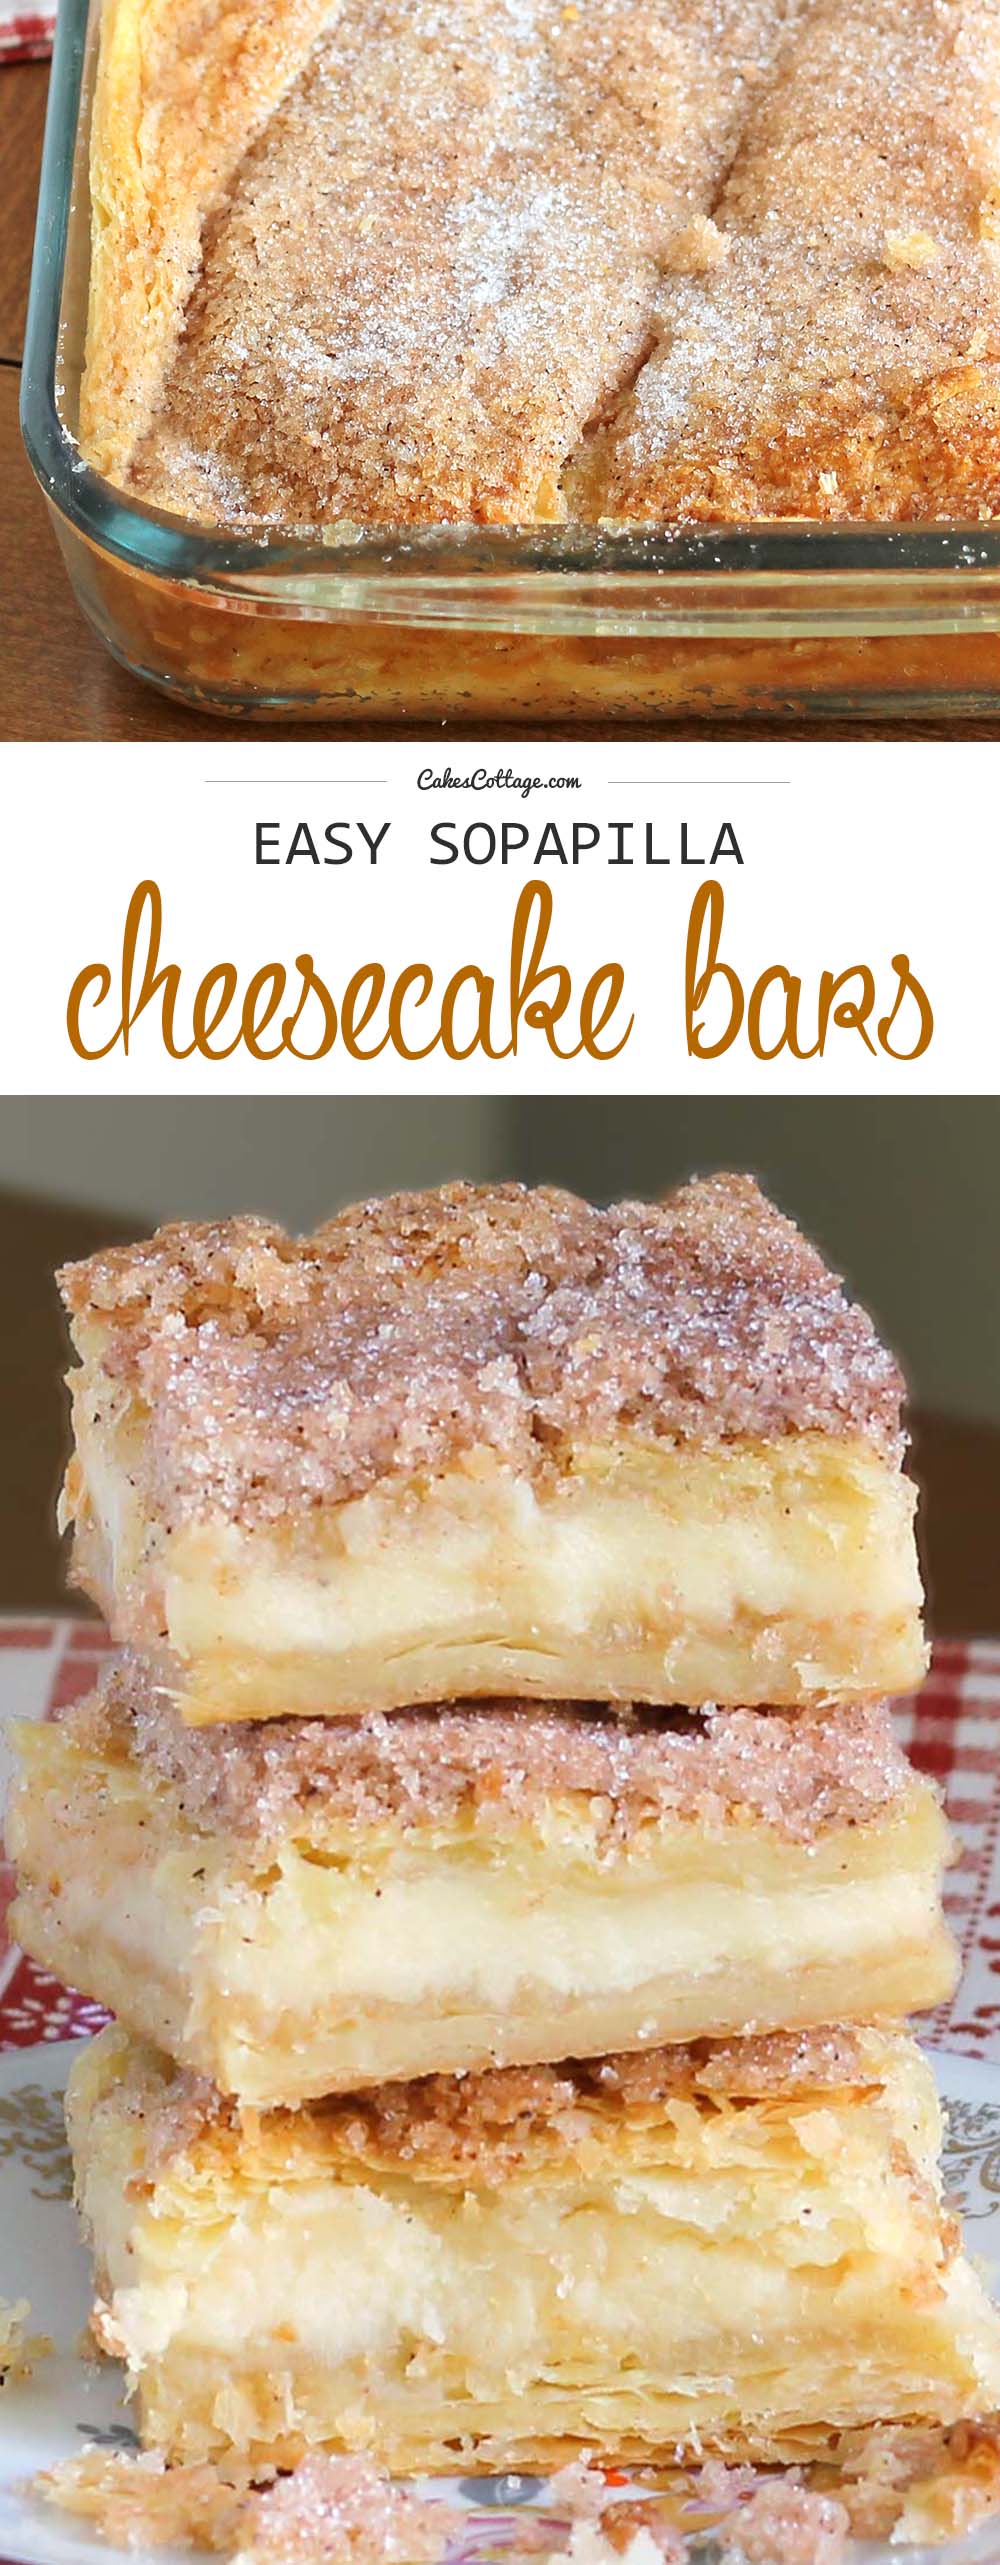 This version of sopapilla cheesecake bars is quick and easy with minimal effort. It starts and ends with Crescent Rolls, with simplest cheesecake filling. GOOD TIMES.